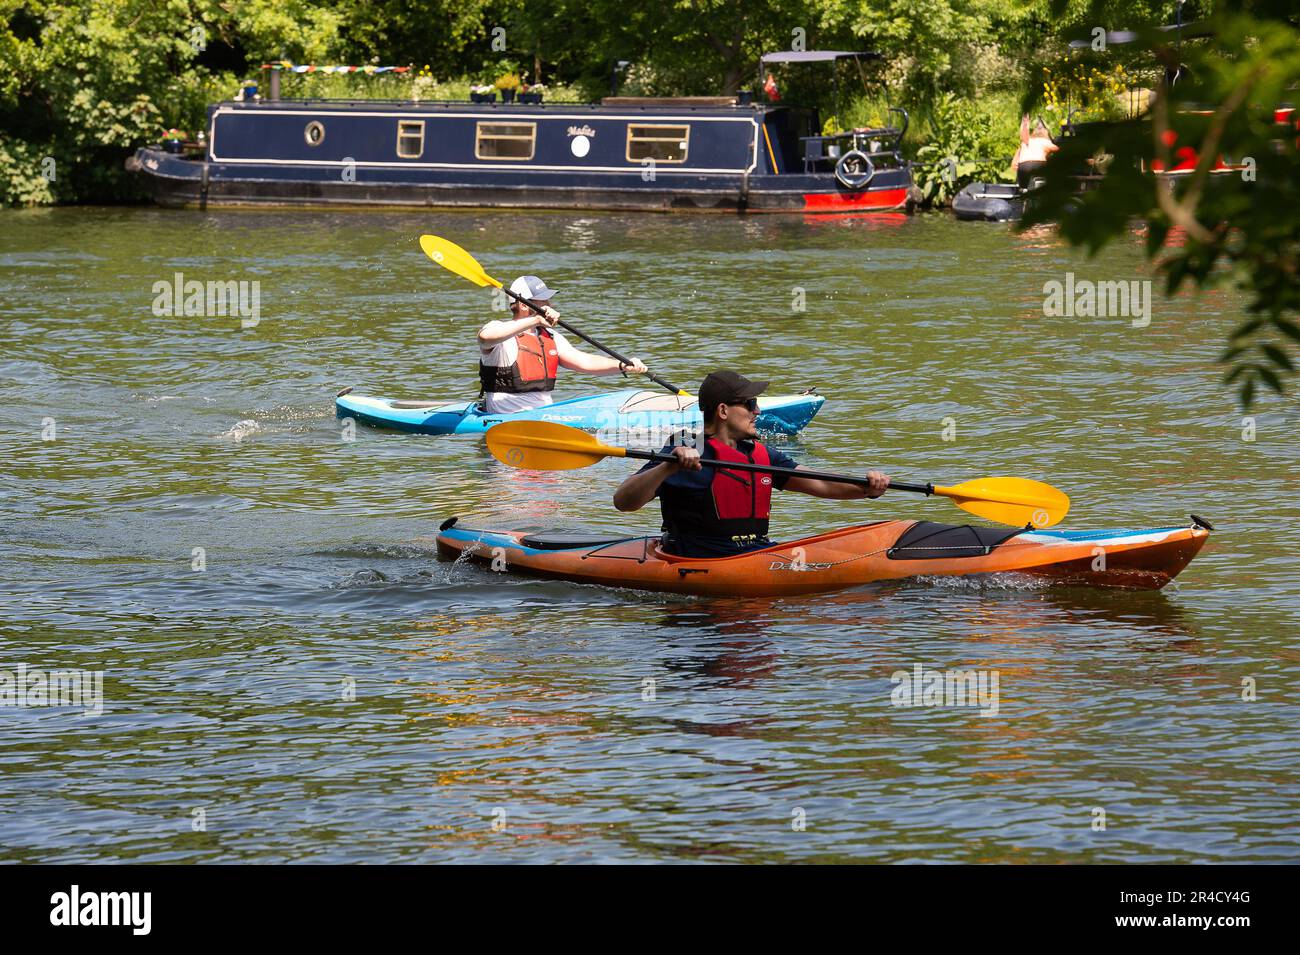 Windsor, Berkshire, UK. 27th May, 23. Kayaks out on the River Thames in Windsor today. Credit: Maureen McLean/Alamy Live News Stock Photo